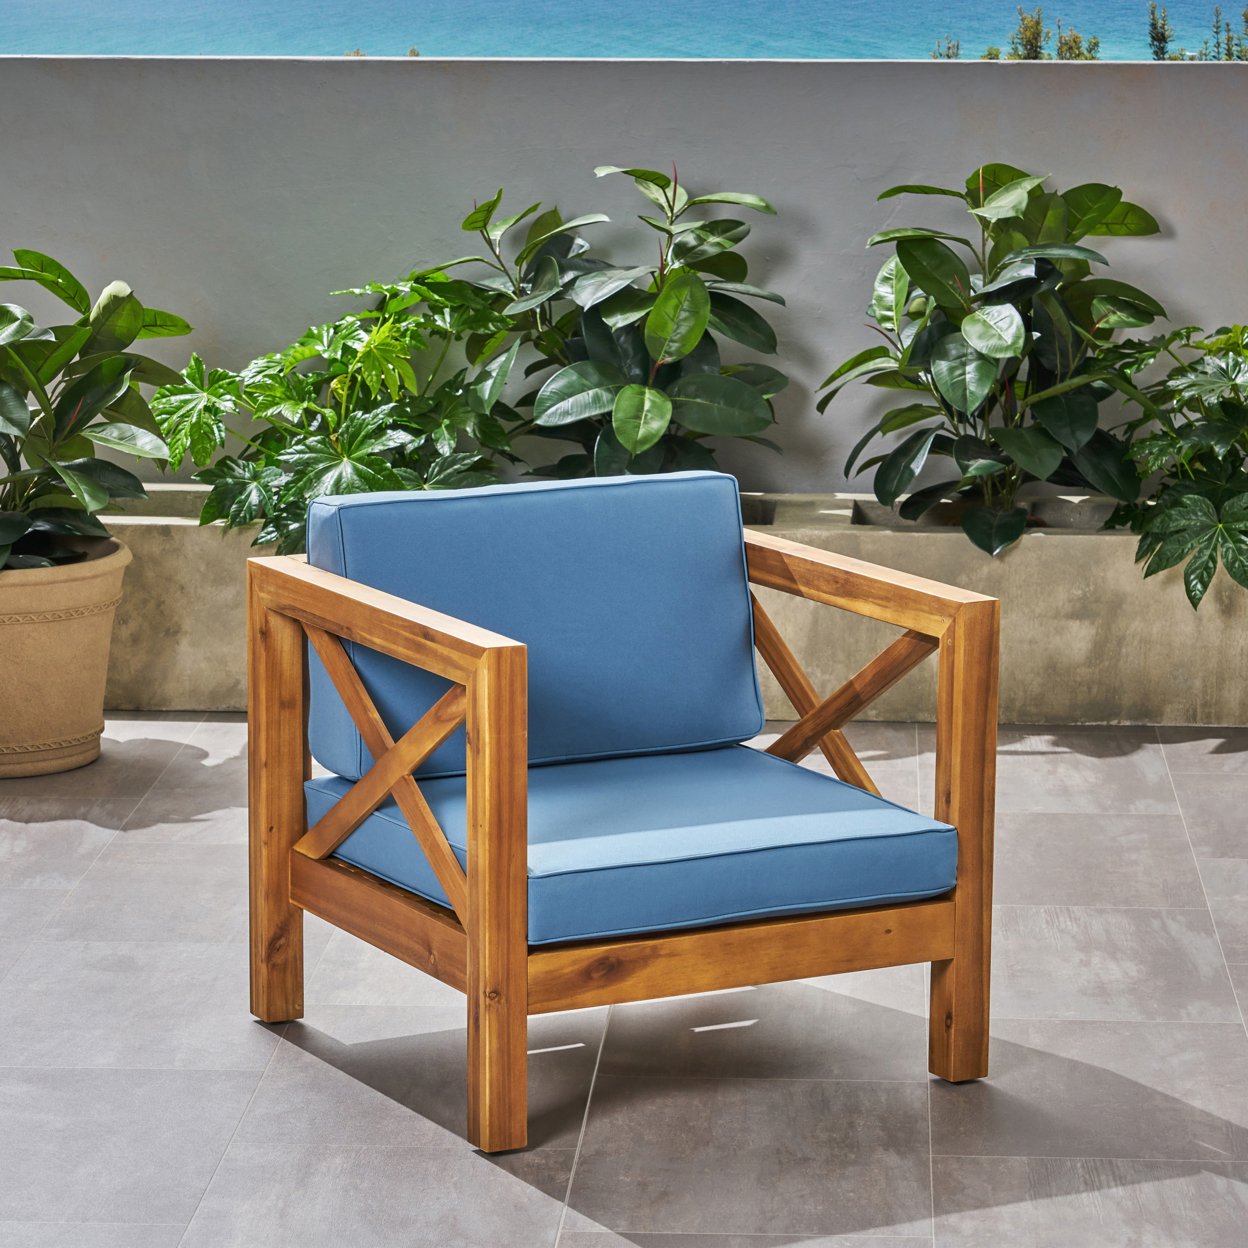 Indira Outdoor Acacia Wood Club Chair With Cushion - Gray Finish + White